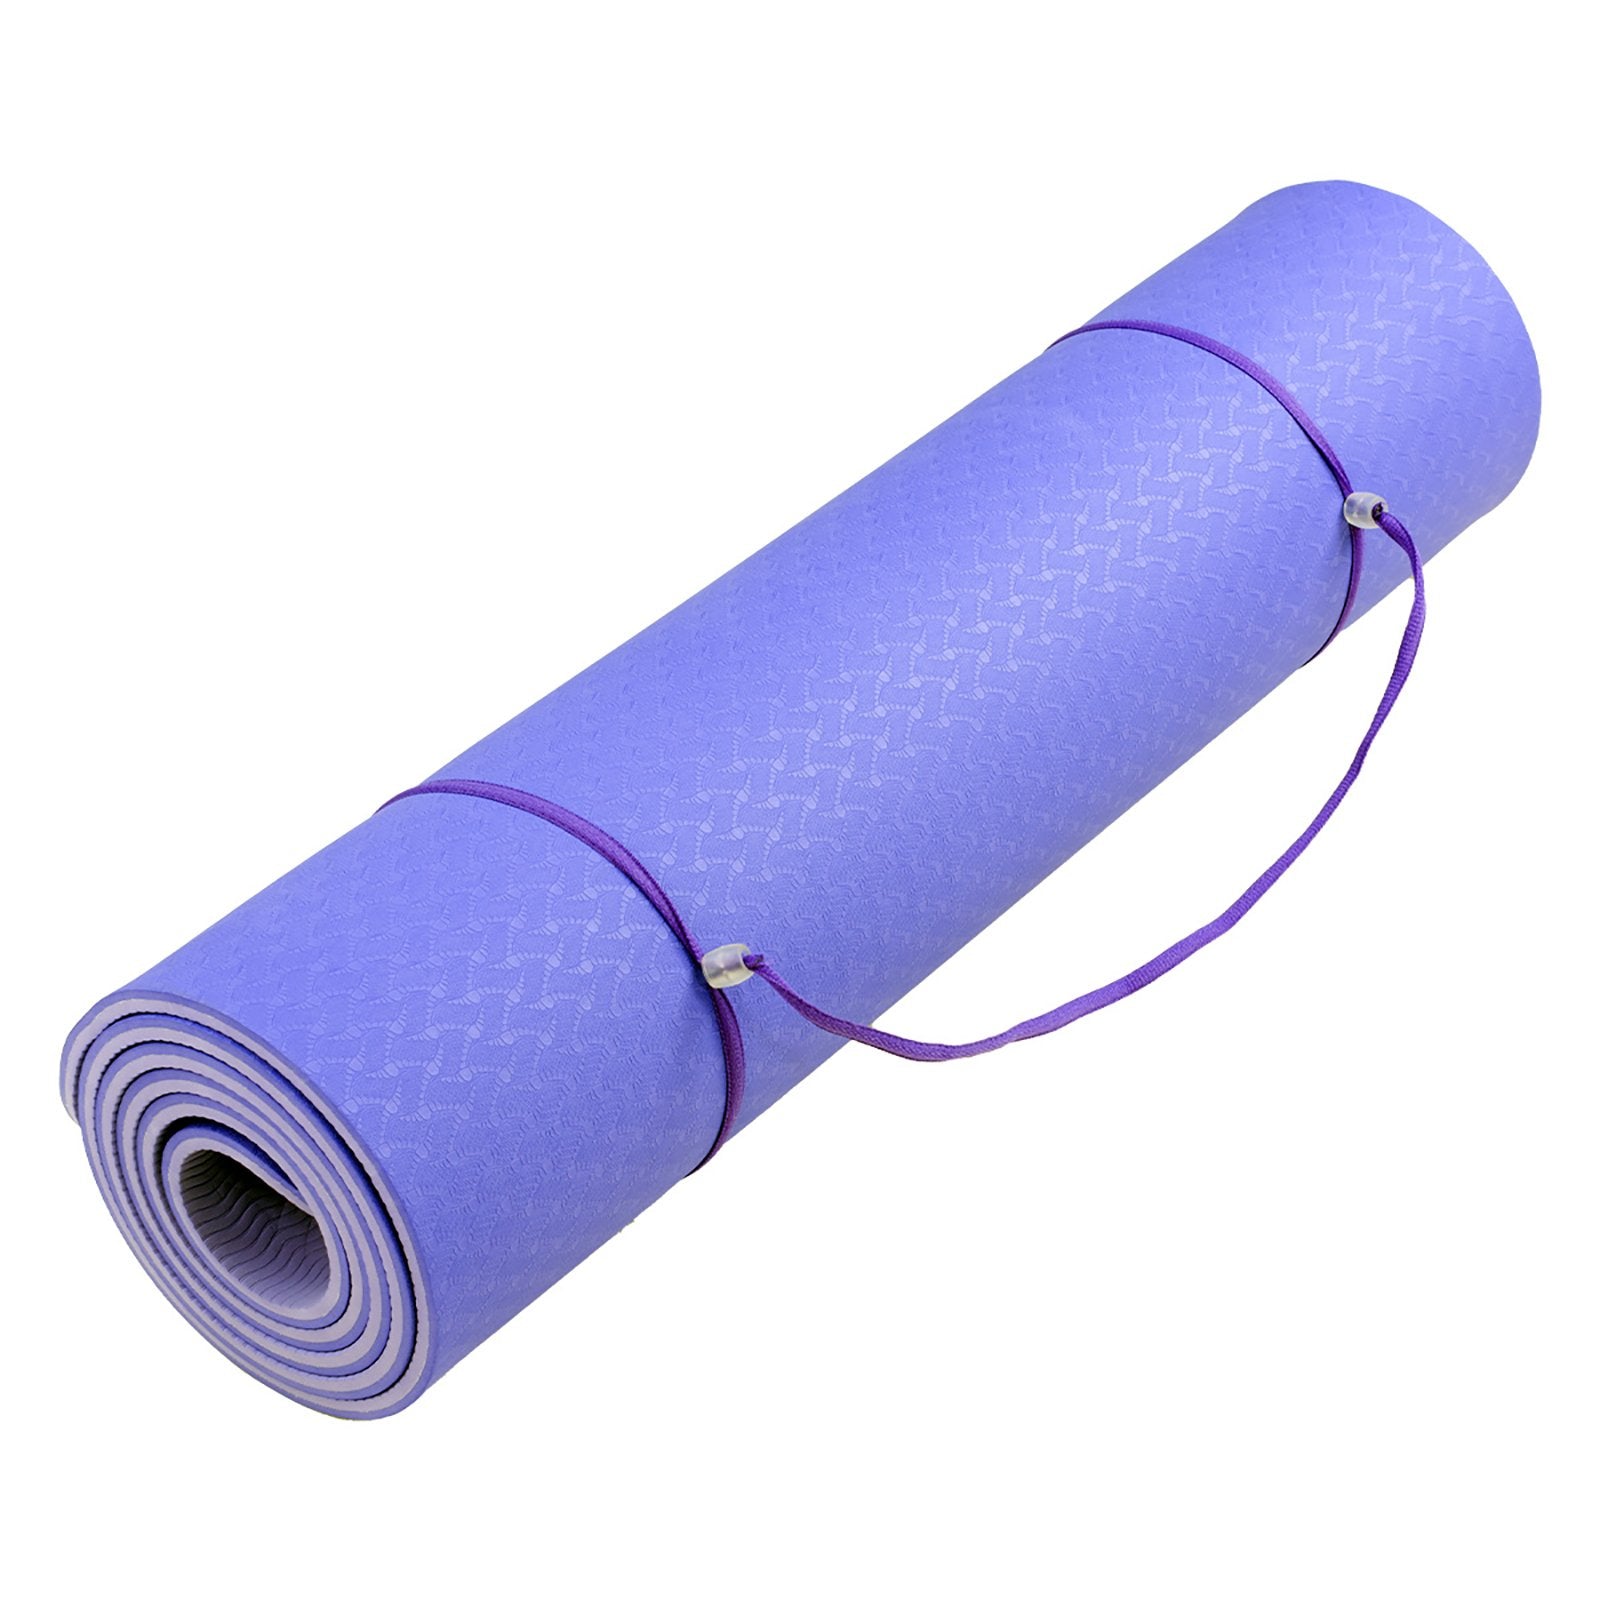 Eco-friendly Dual Layer 8mm Yoga Mat | Light Purple | Non-slip Surface And Carry Strap For Ultimate Comfort And Portability